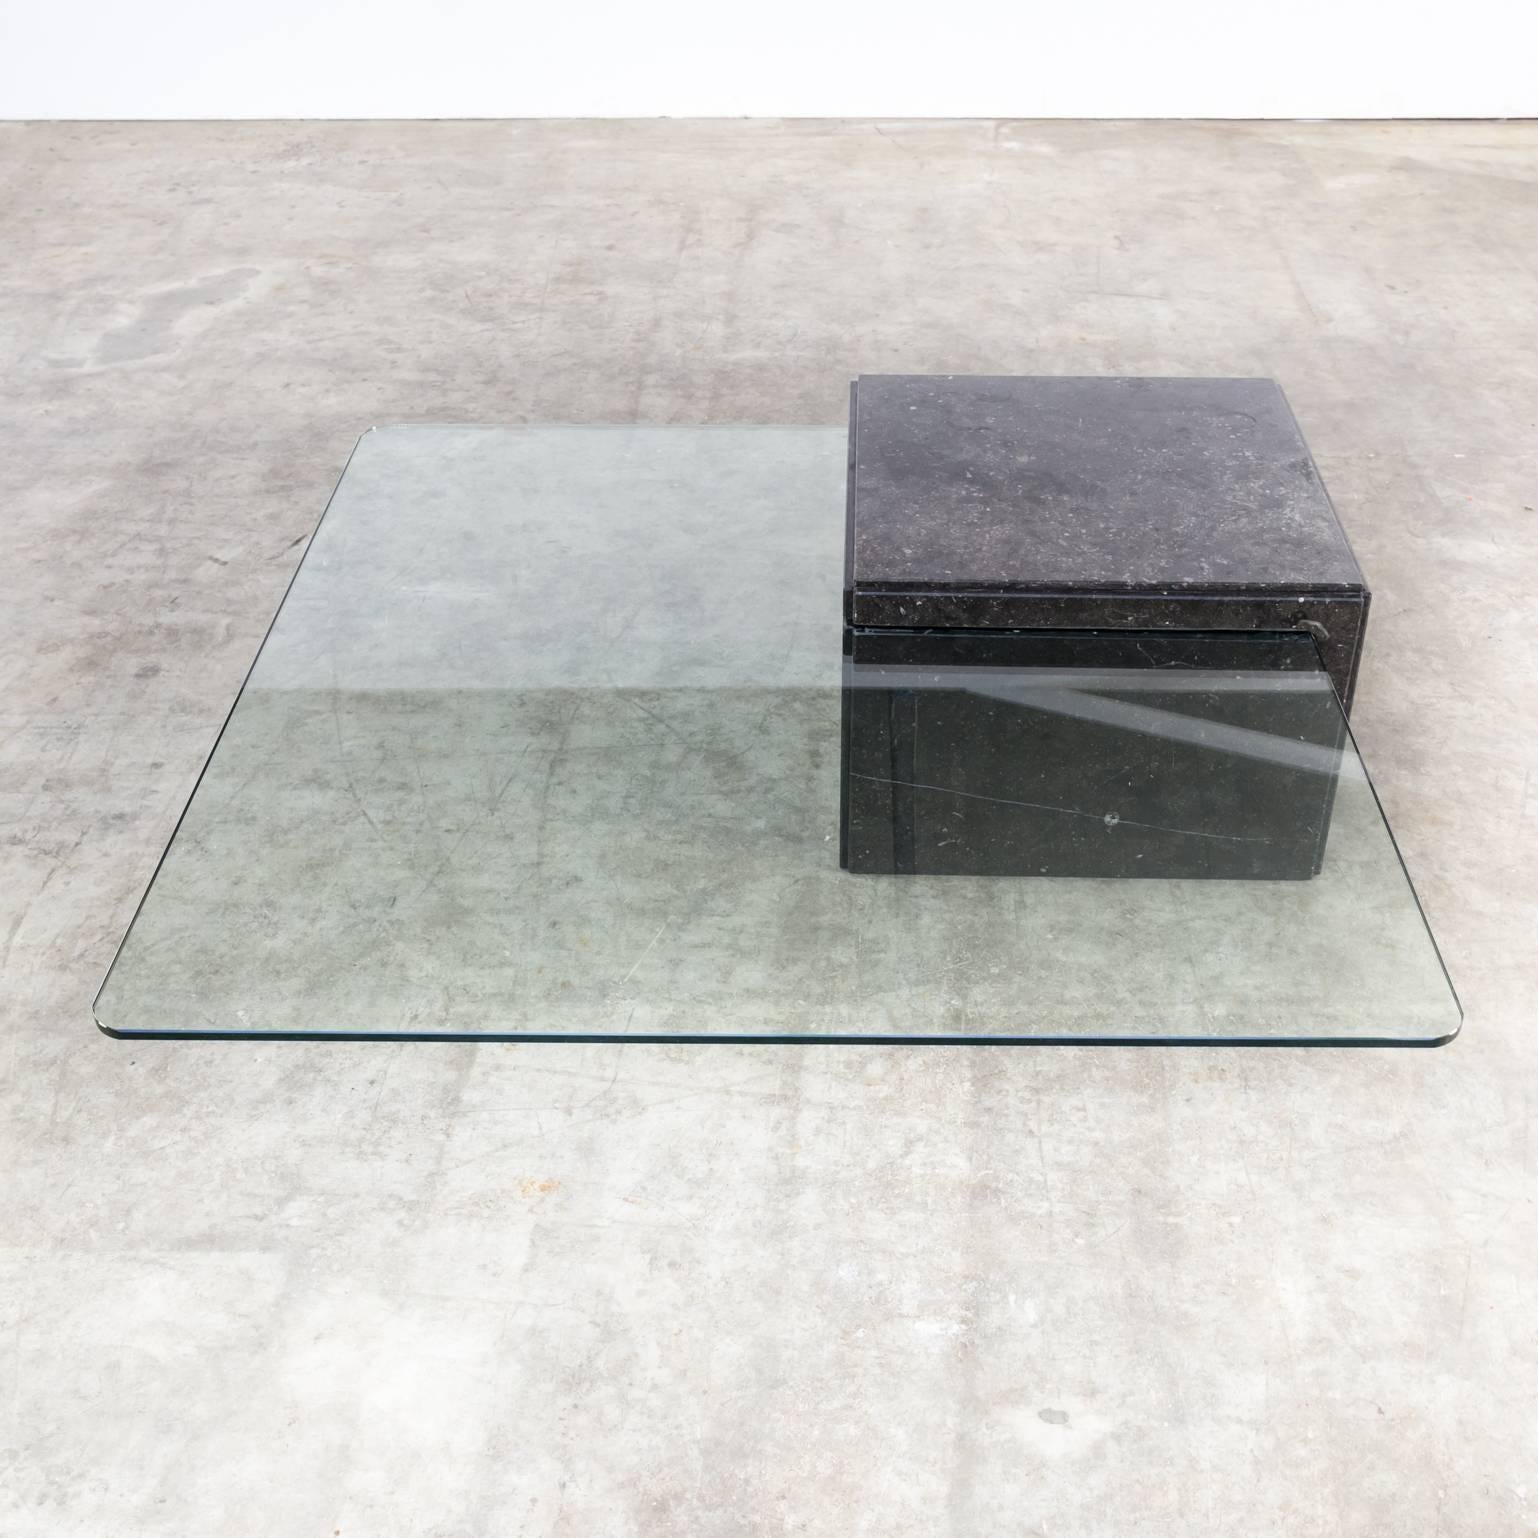 A glass and granite coffee table from the 1970s in good condition, wear consistent with age and use.